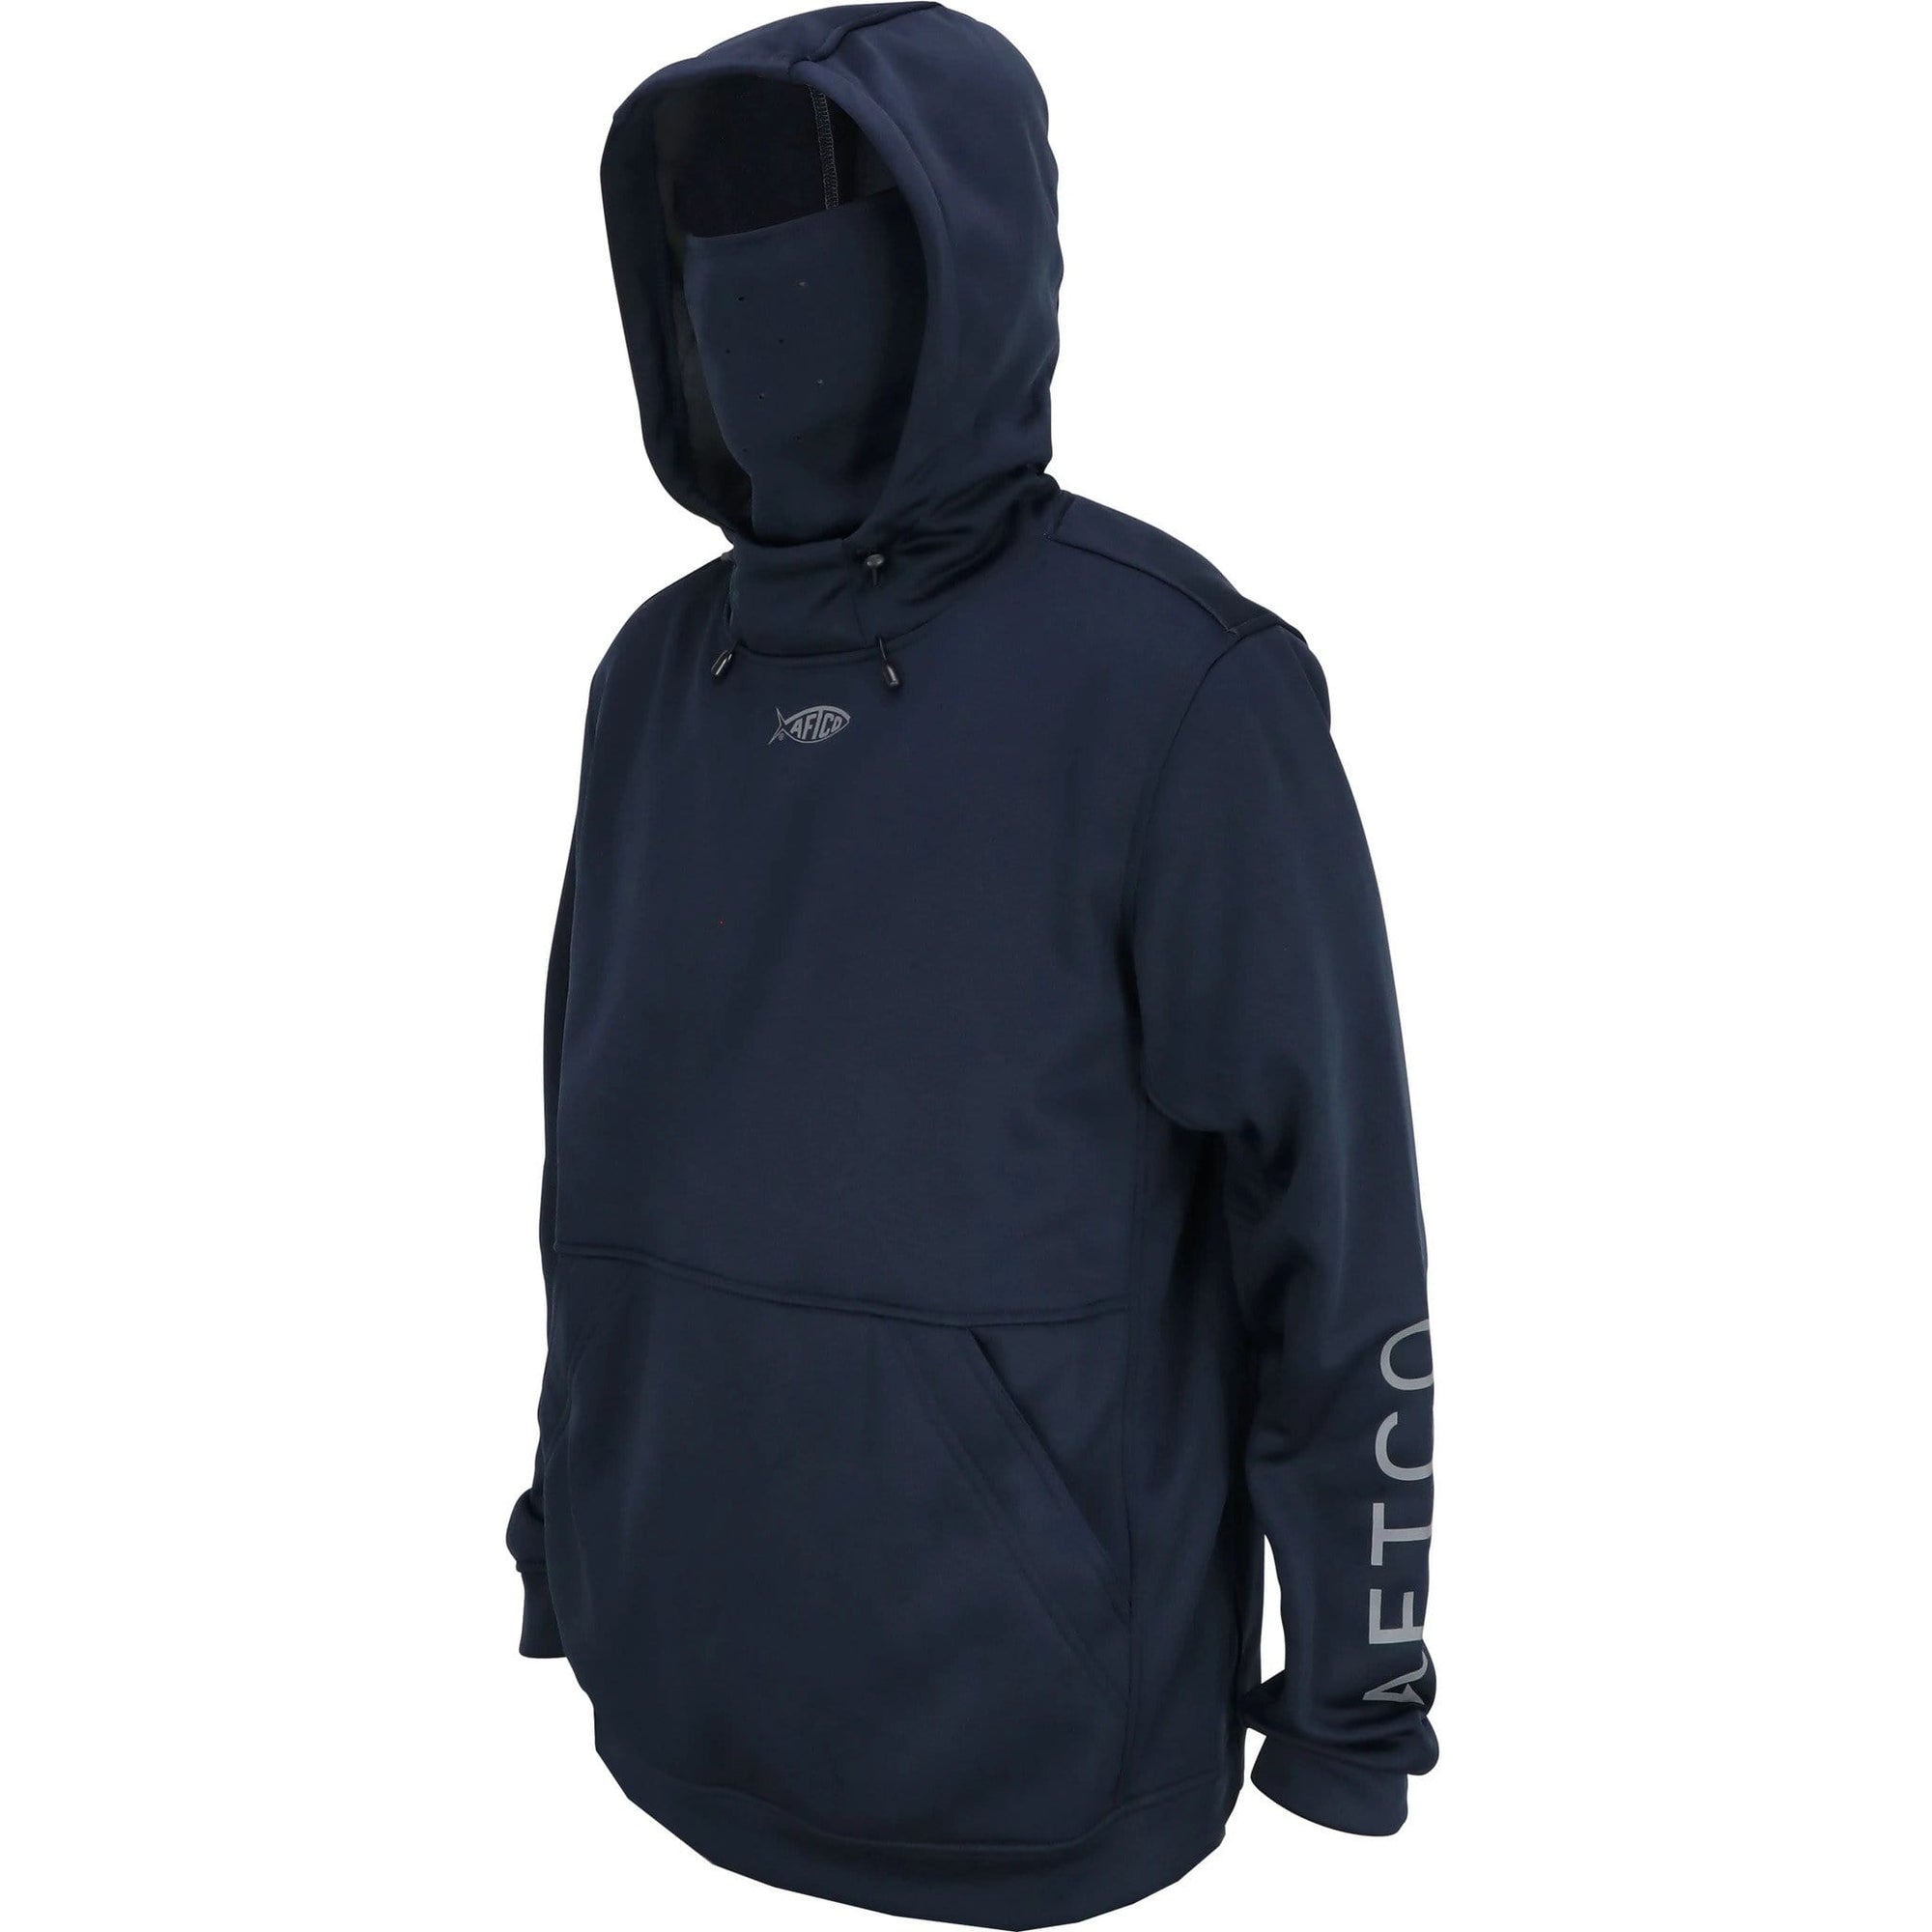 Aftco Reaper Technical Sweatshirt Navy / Small